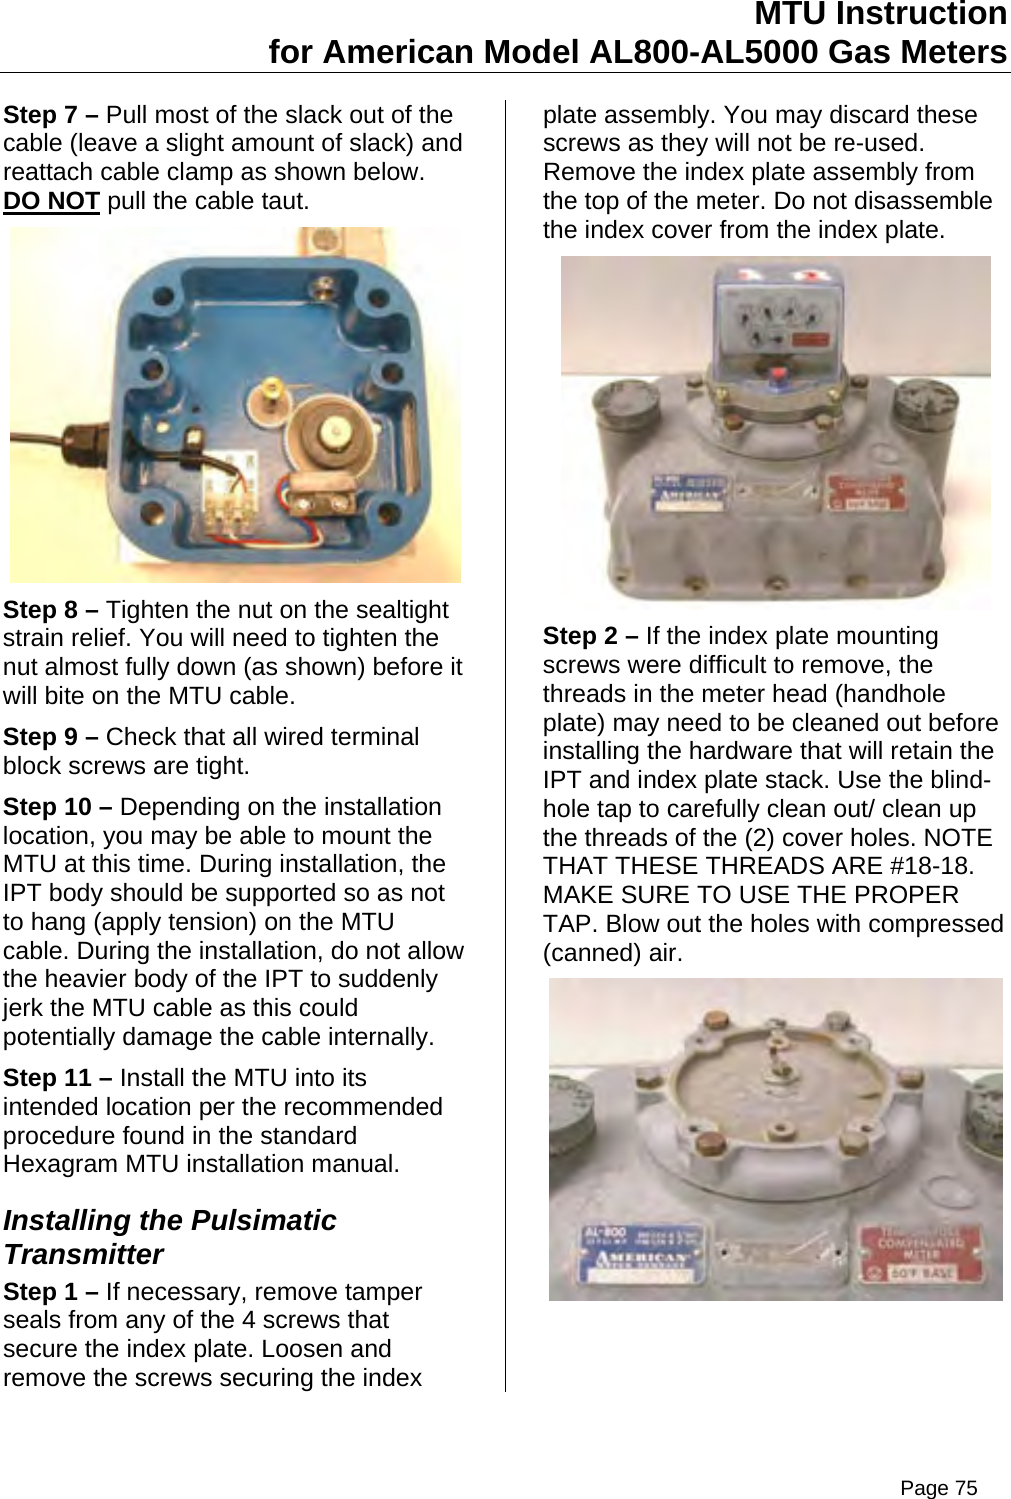 Page 75 of Aclara Technologies 09015 Transmitter for Meter Reading User Manual users manual